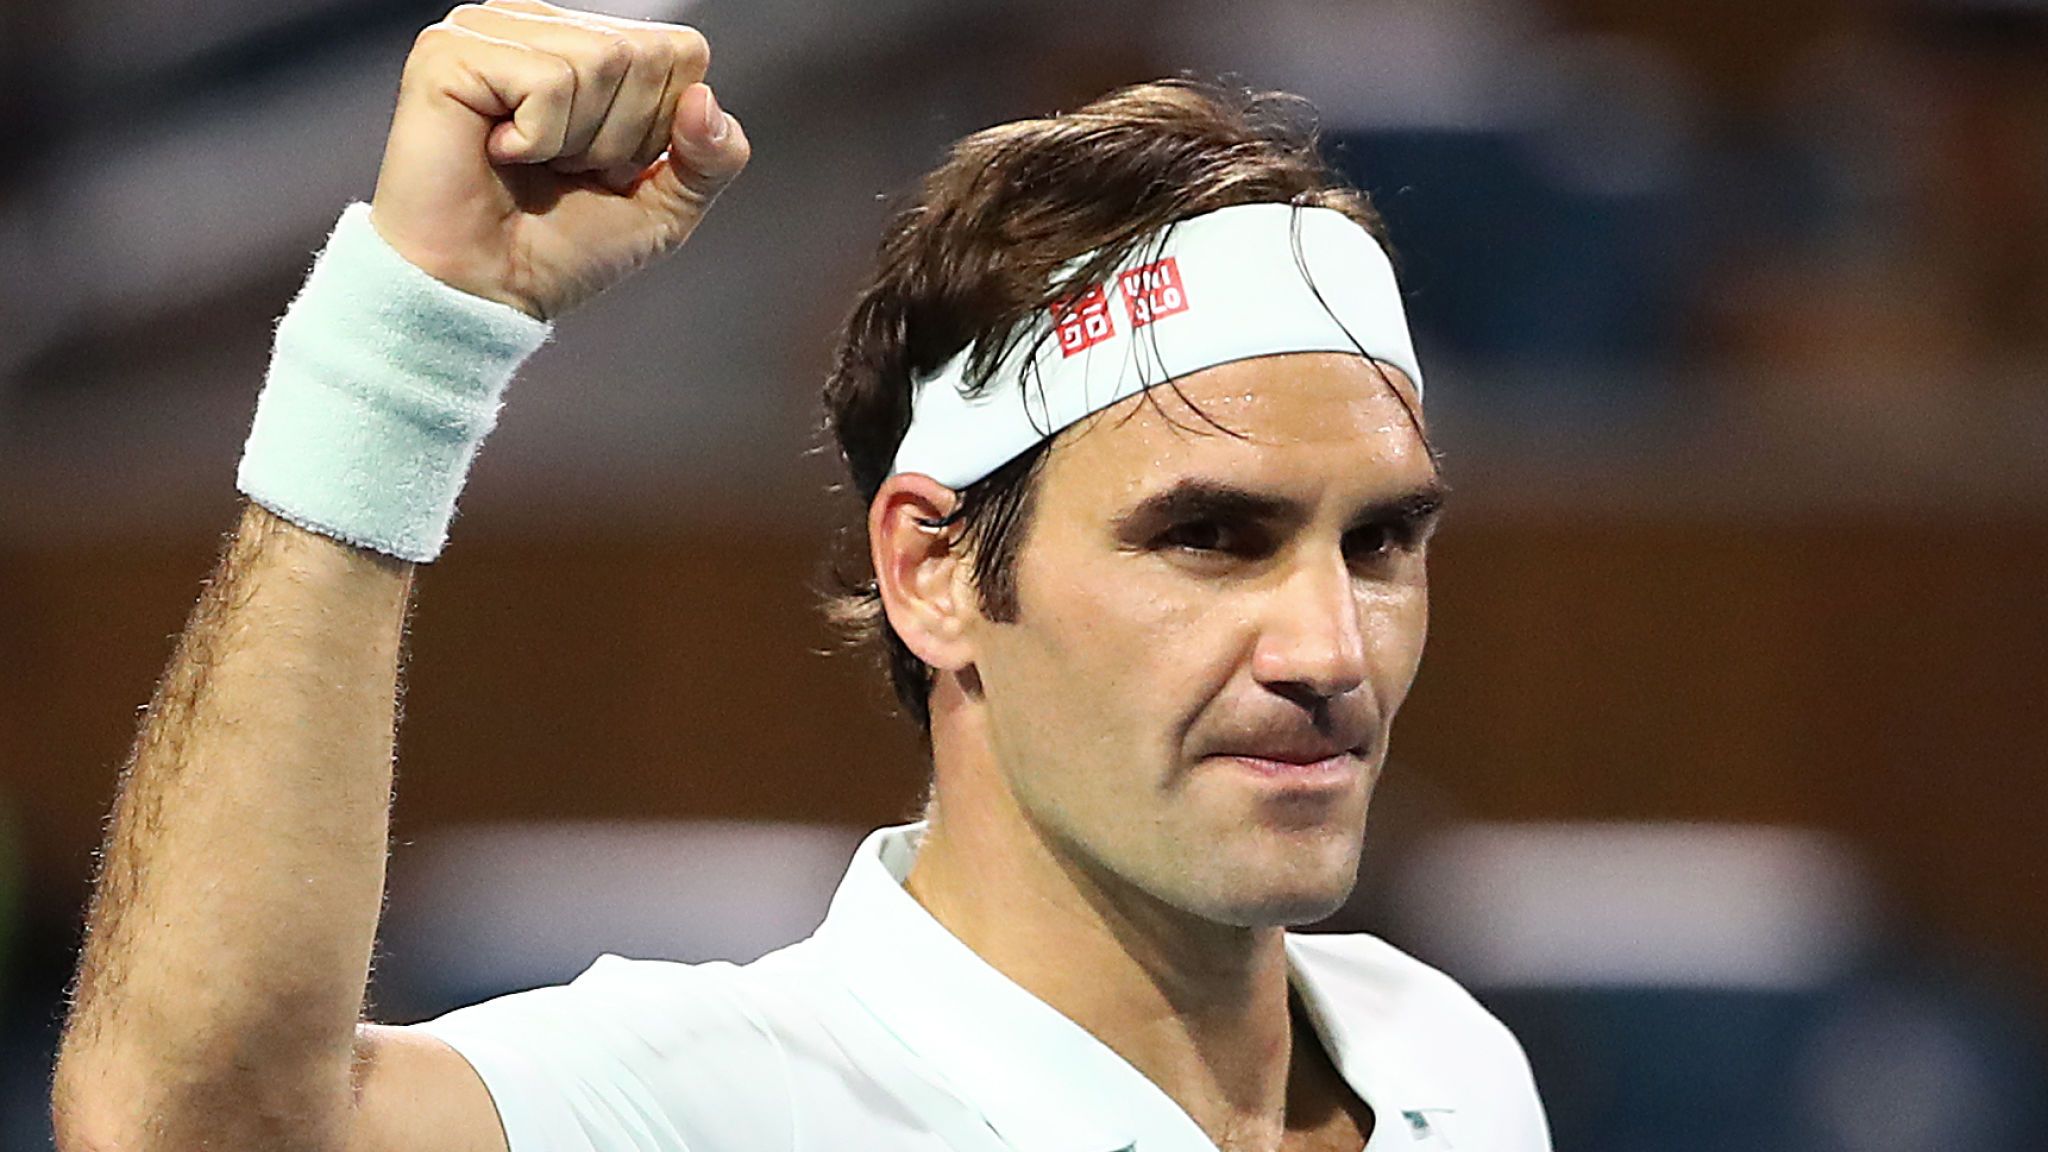 Roger Federer retirement: What's next for the tennis player?